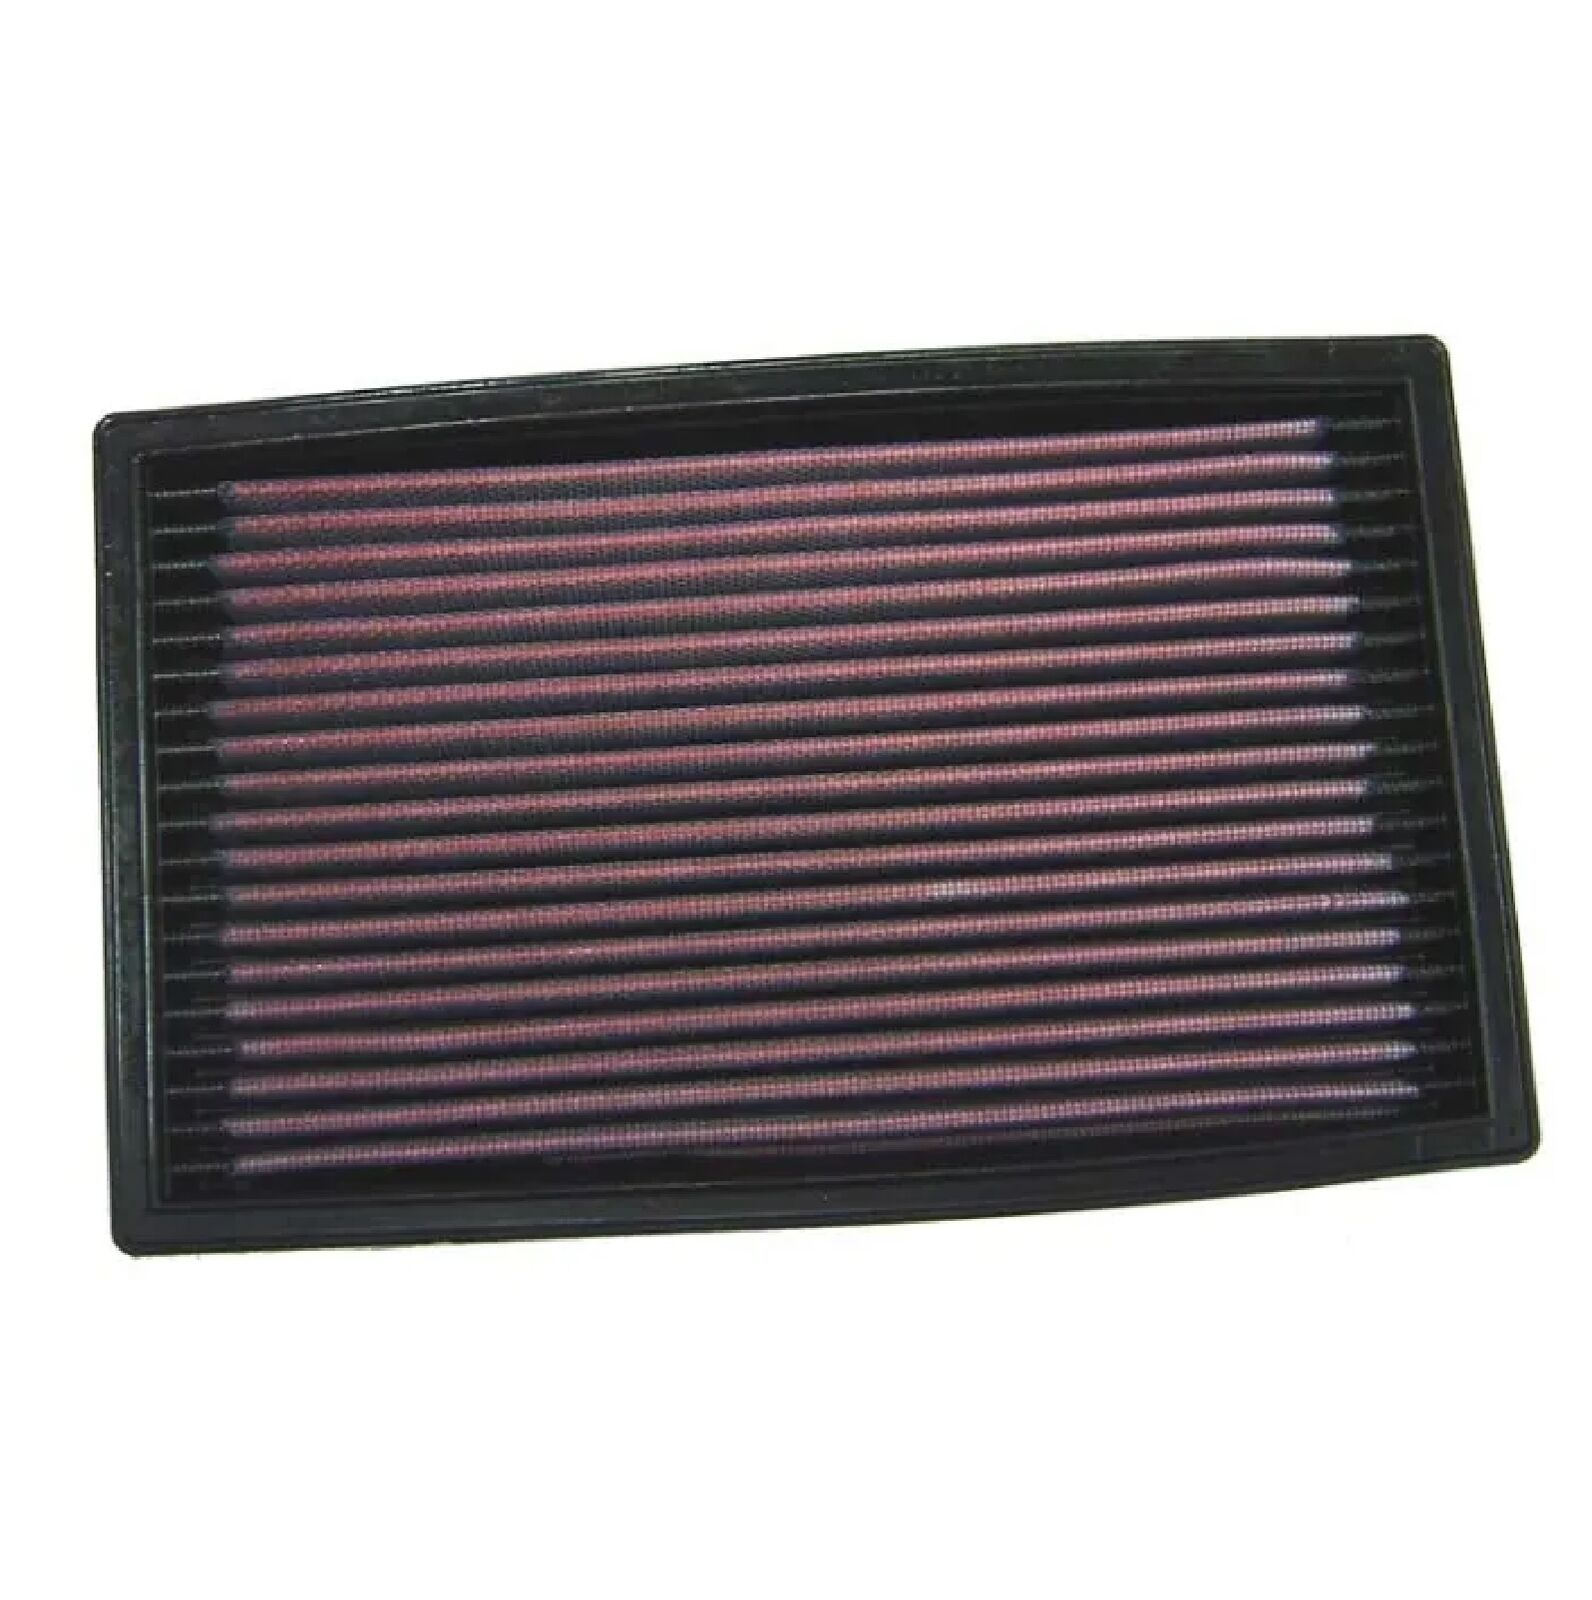 K&N 33-2034 Replacement Red Cotton Air Filter for Escort/323/Miata/Tracer/Sephia